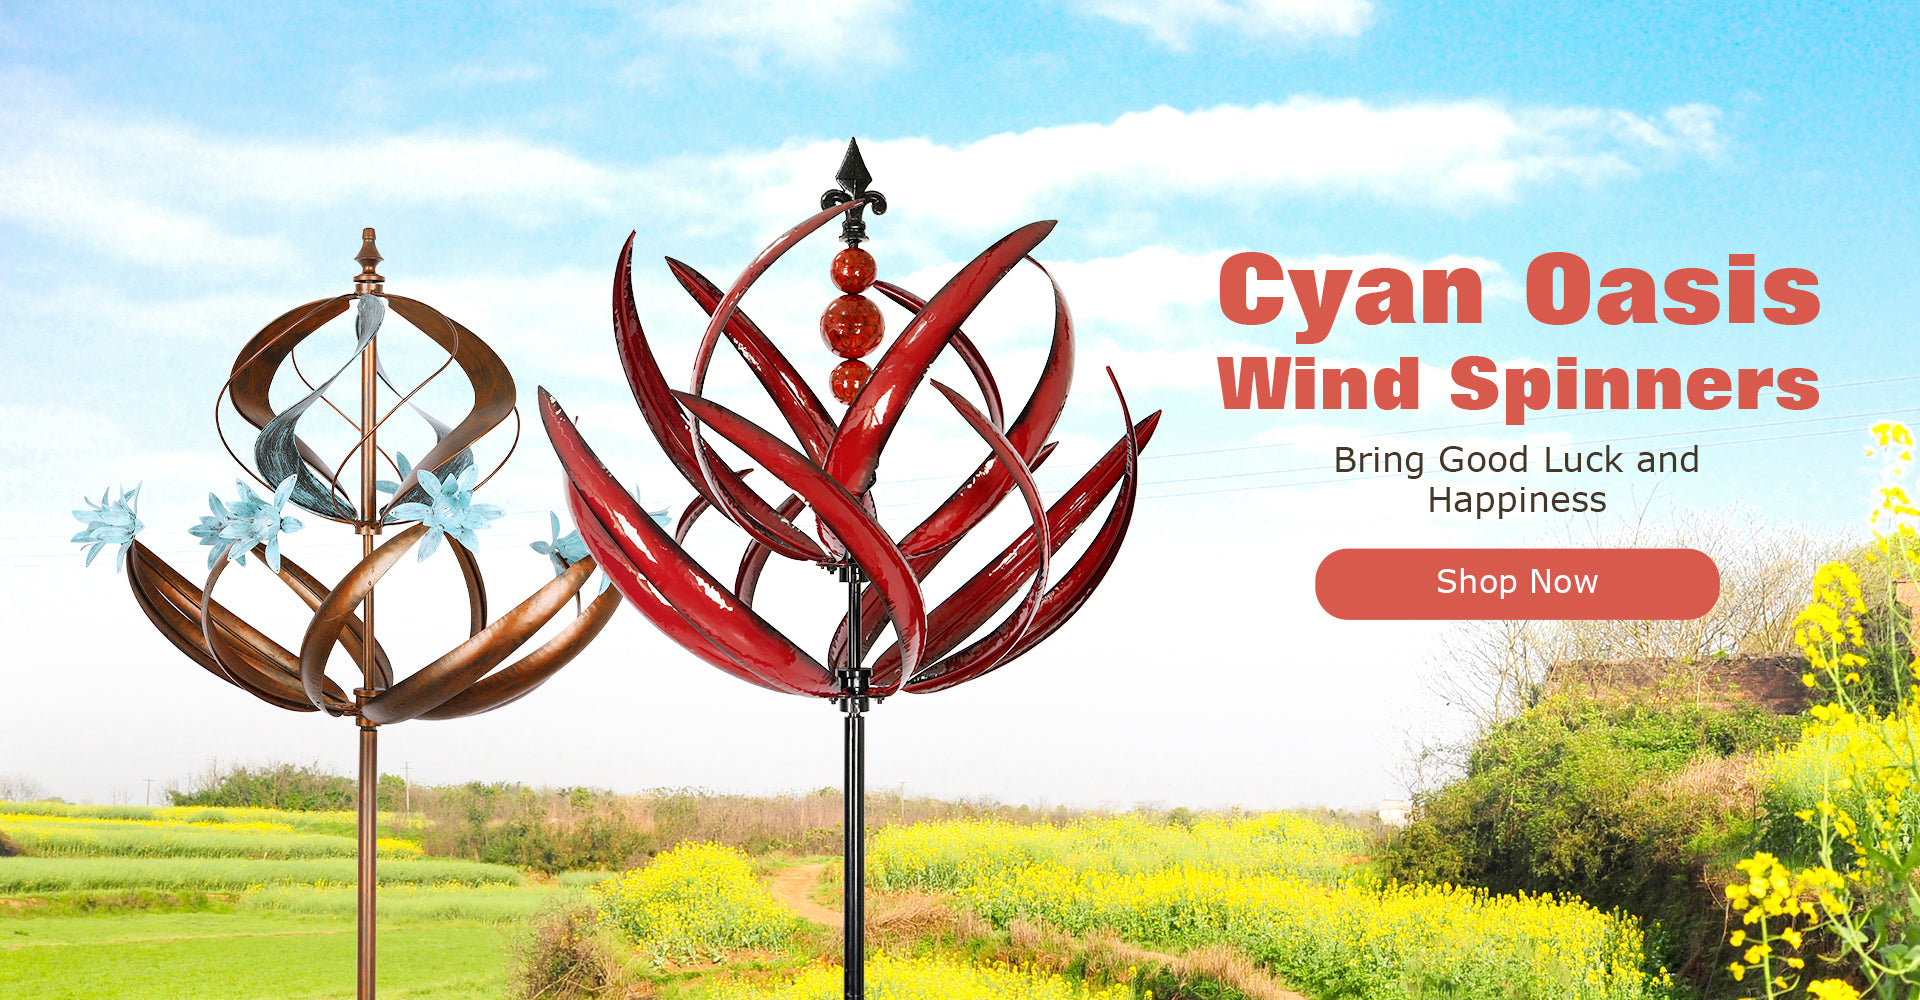 Shop Wind Spinners, Garden Decor / Feel the Wind, Free your Mind